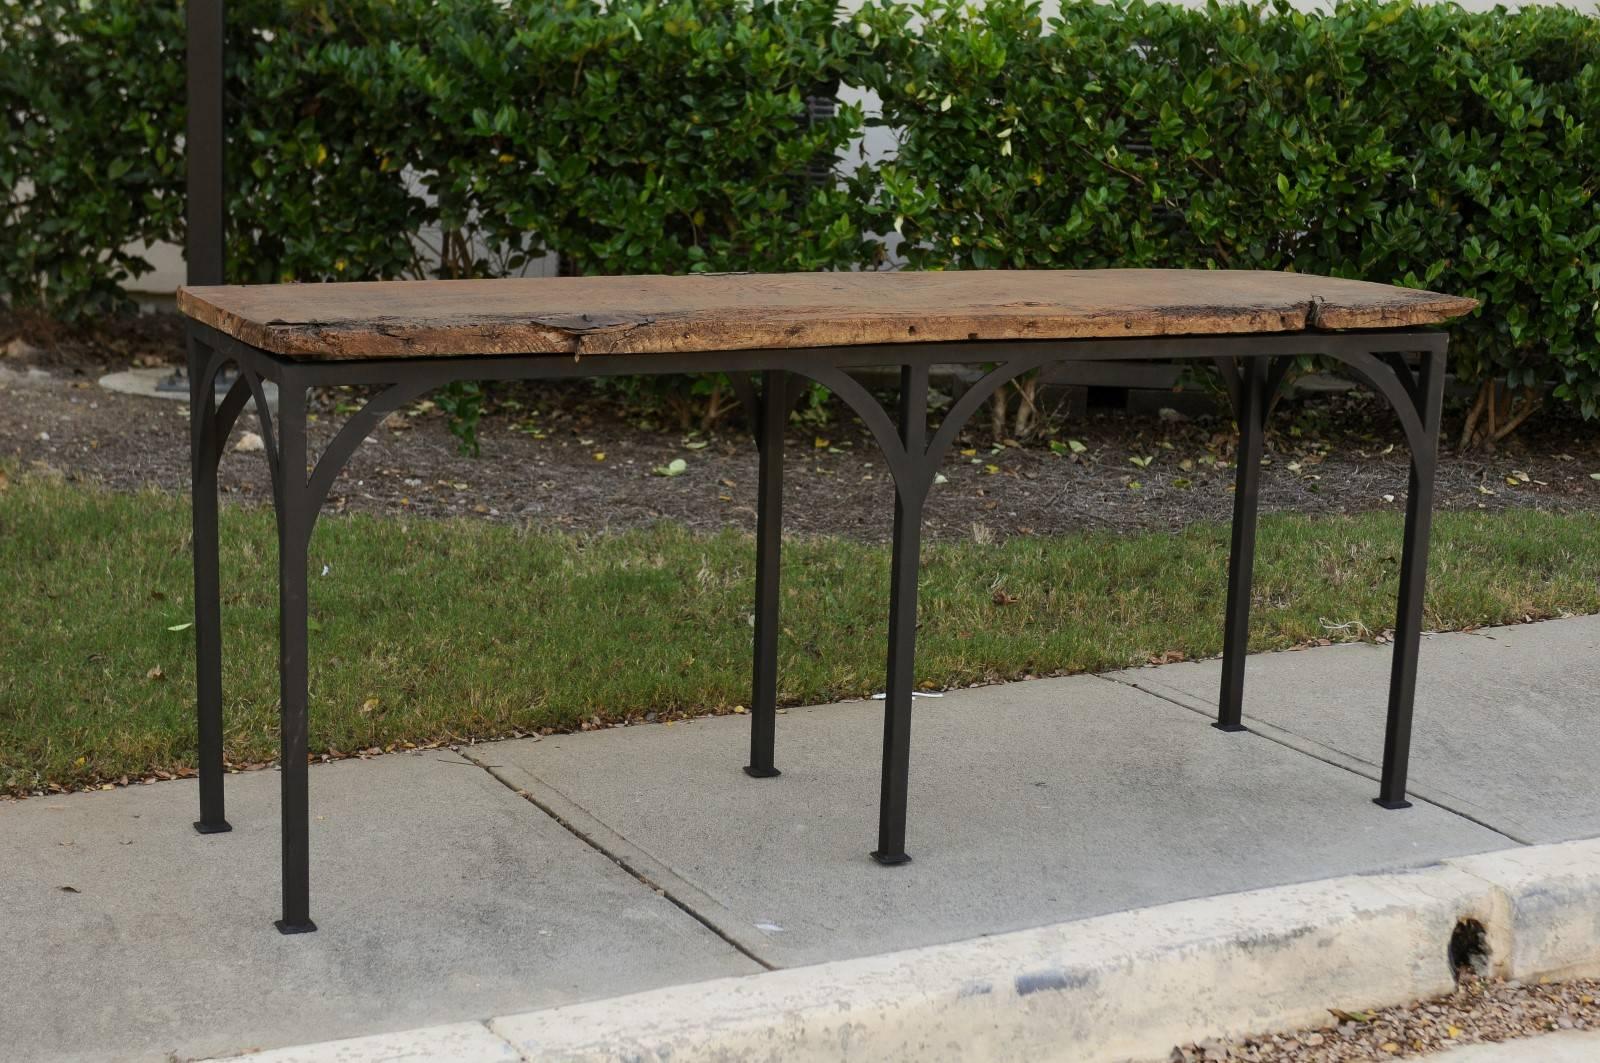 A contemporary console table made of an 18th century Spanish chestnut board mounted on a custom iron base. This console table features a rectangular top made of a nicely weathered chestnut board, secured on custom iron base. This base is made of six